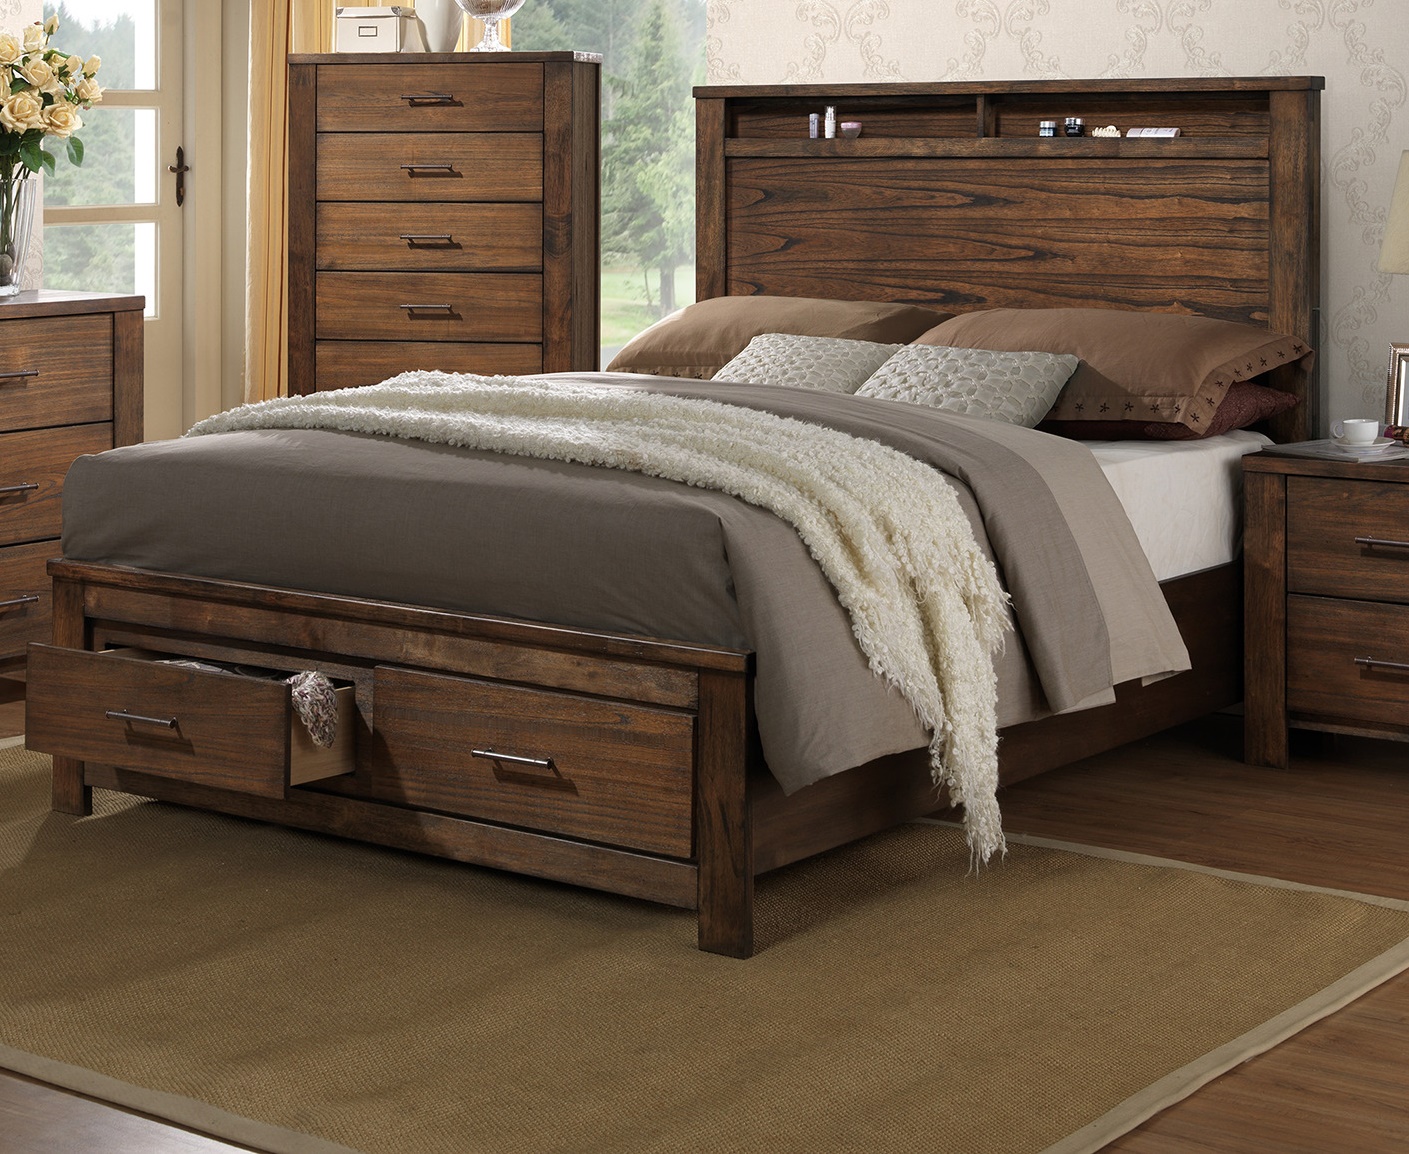 Fb Shelf Hb Bedframe Bedroom Furniture, California King Bed Frame With Headboard And Drawers